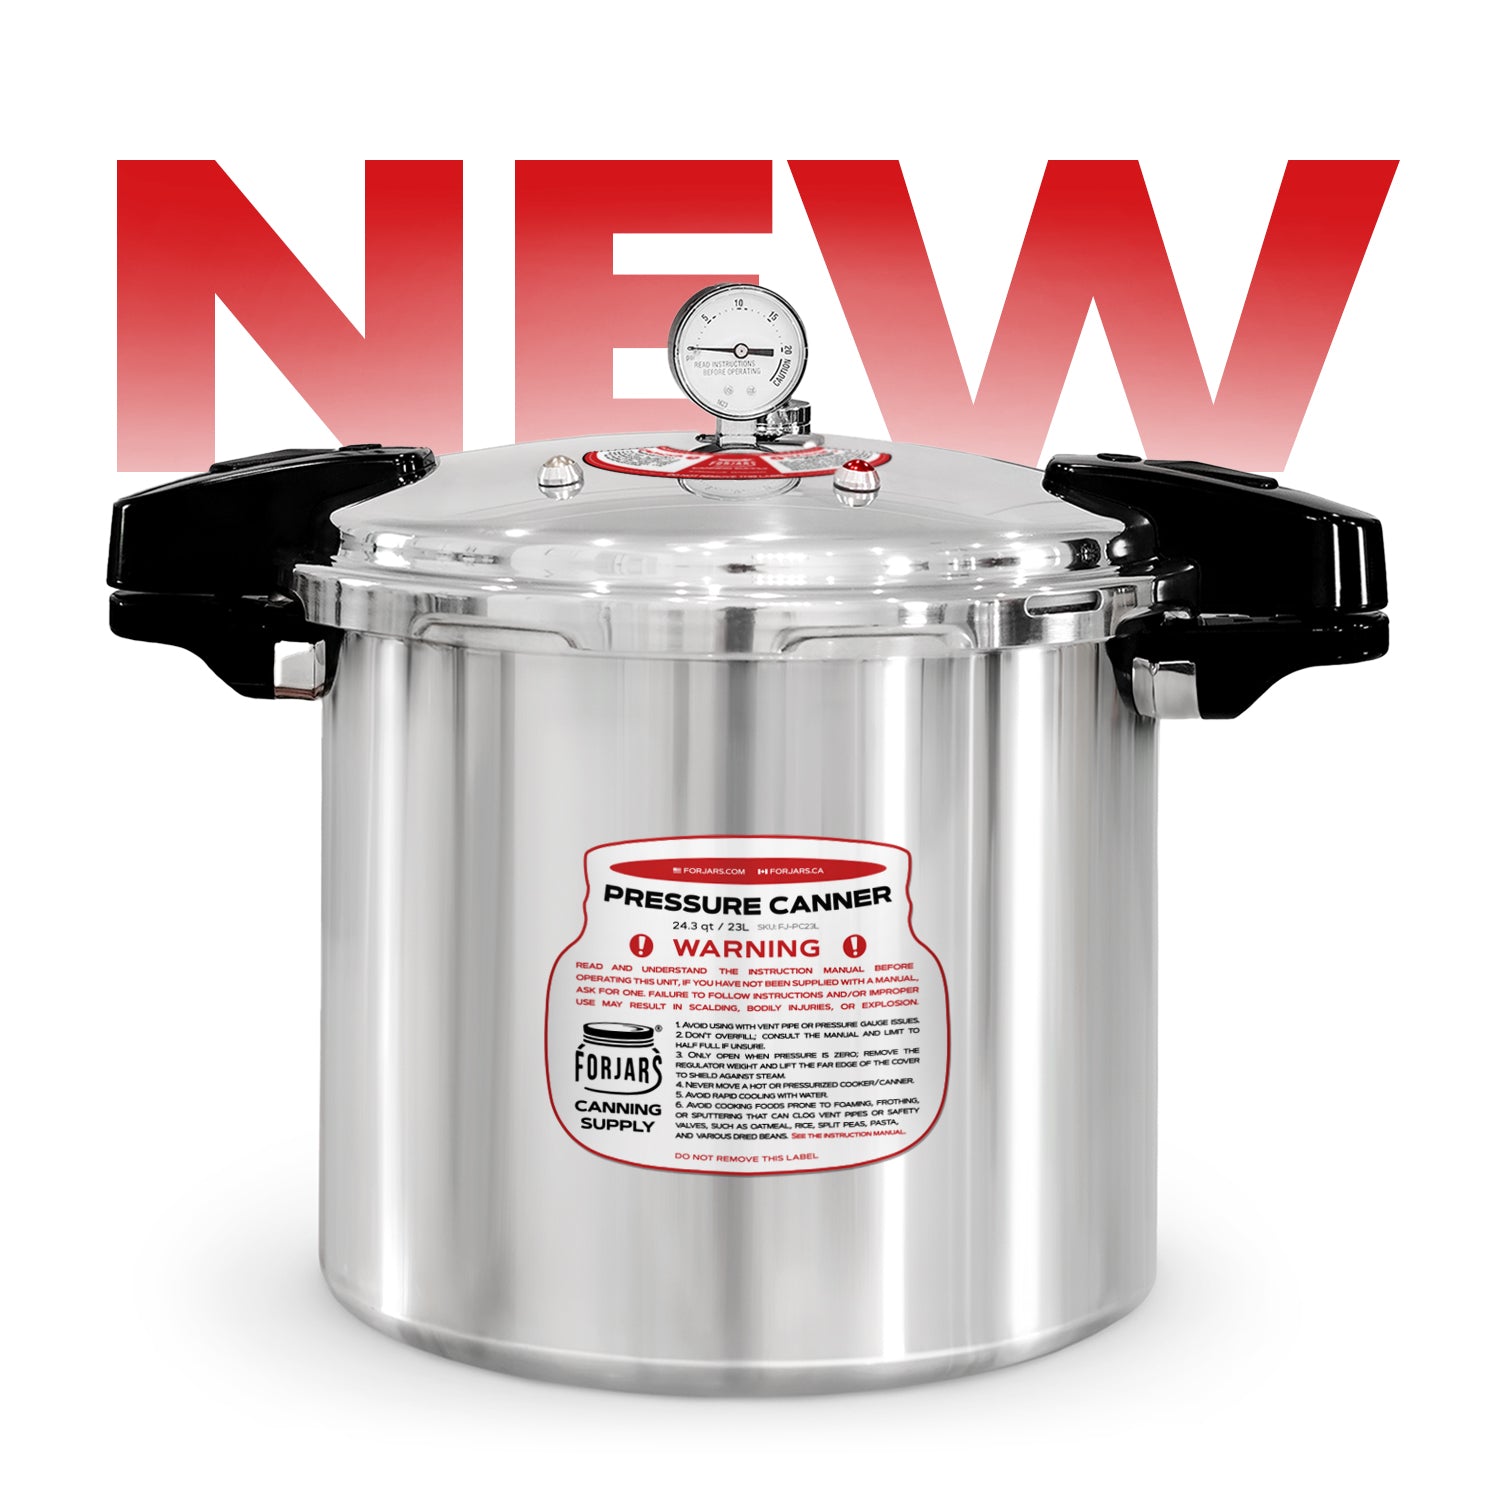 NESCO Electric PRESSURE CANNER Canning Carrots @forjarsusa